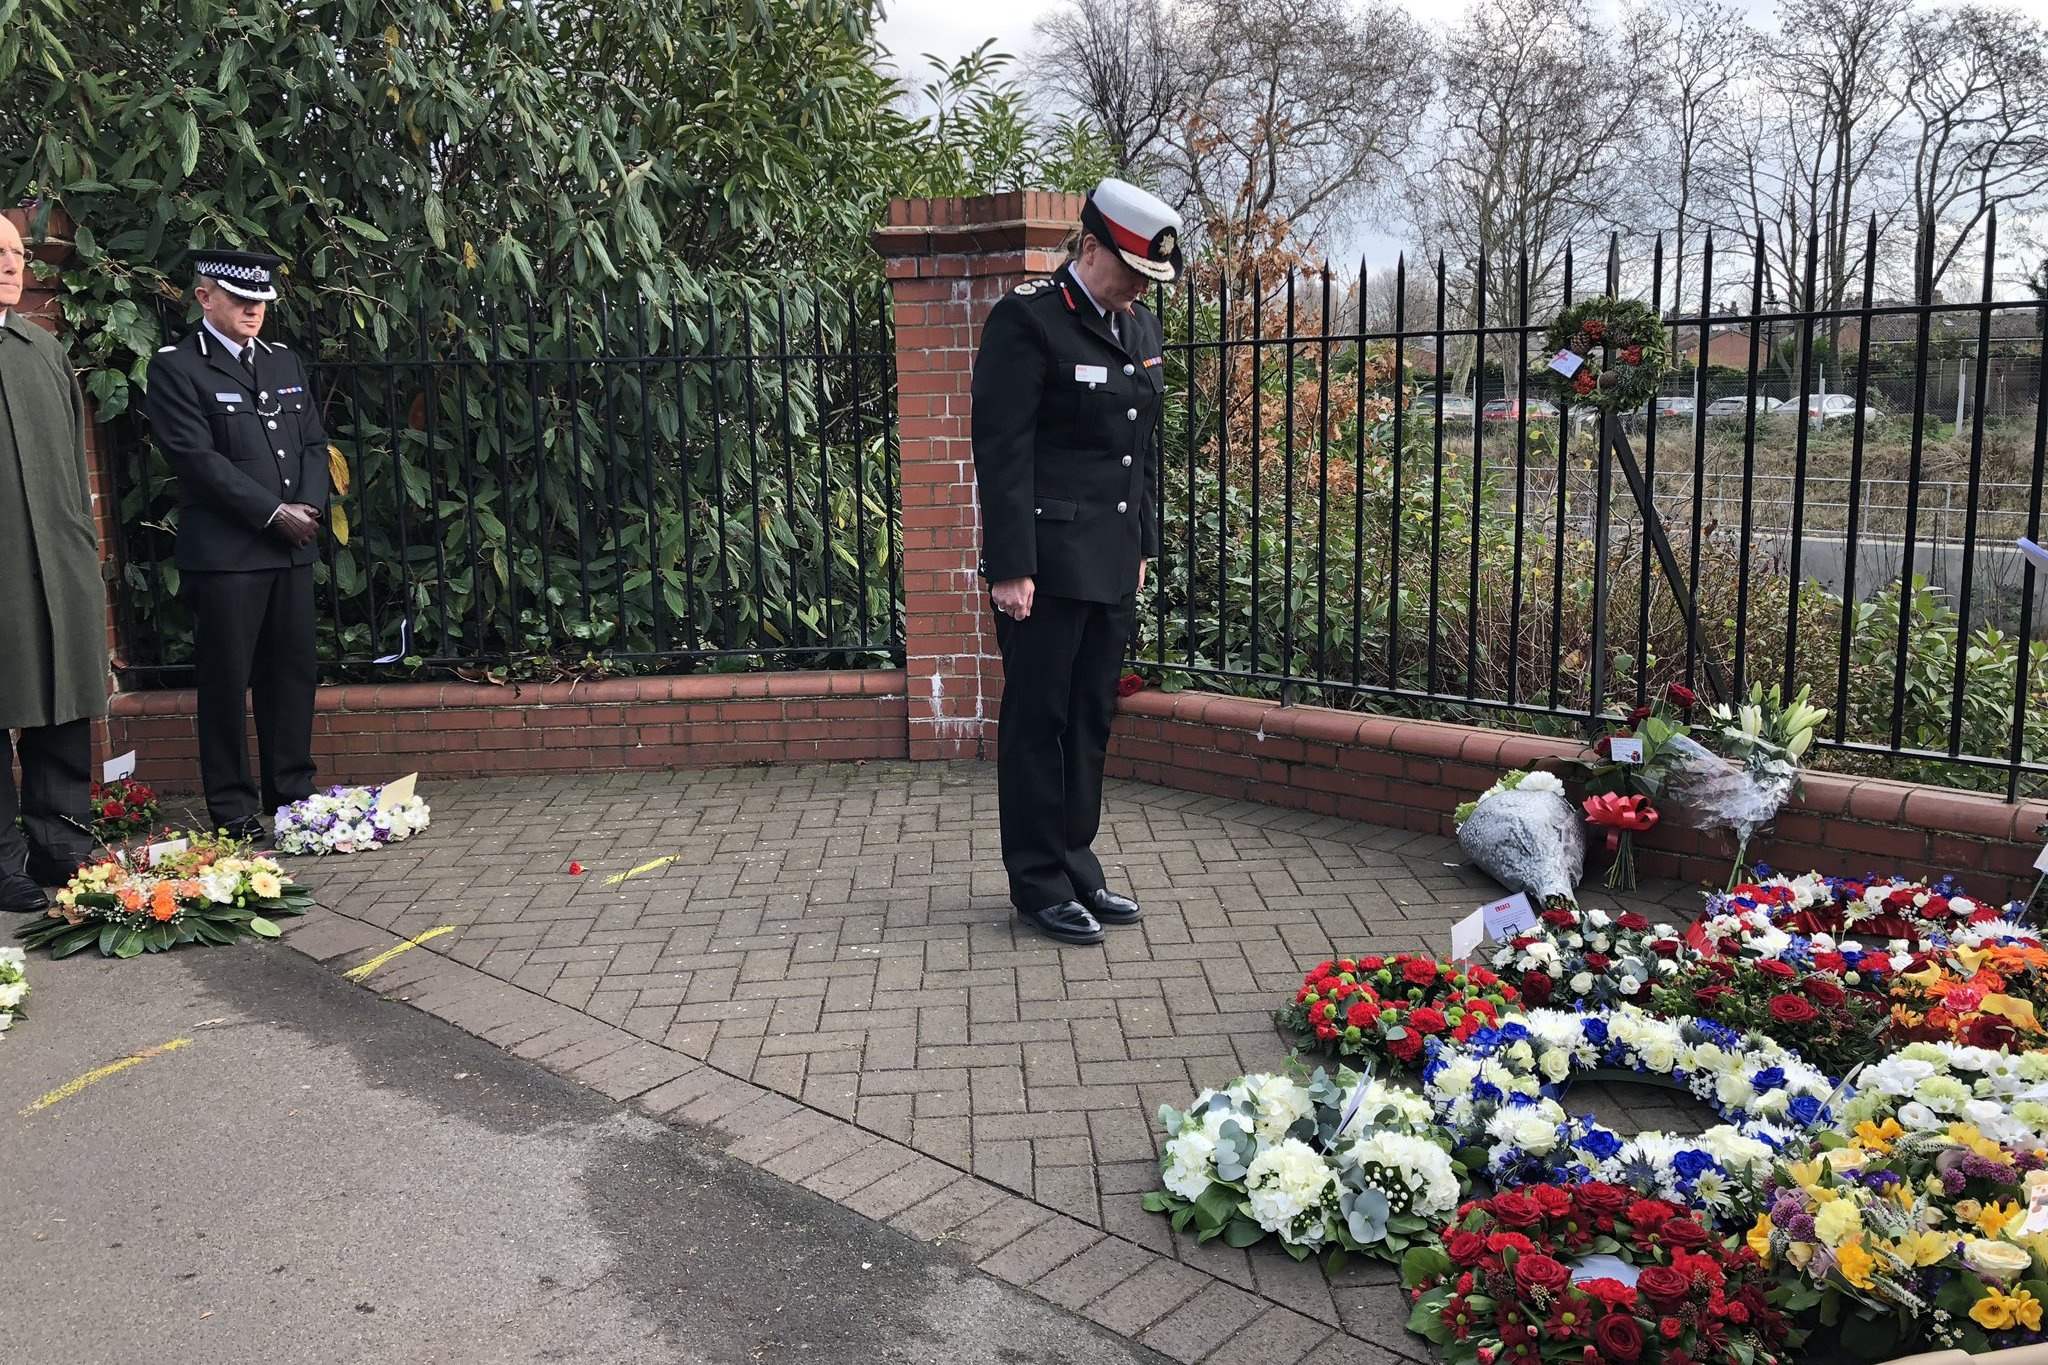 Wandsworth remembers 30 years on from tragic Clapham crash